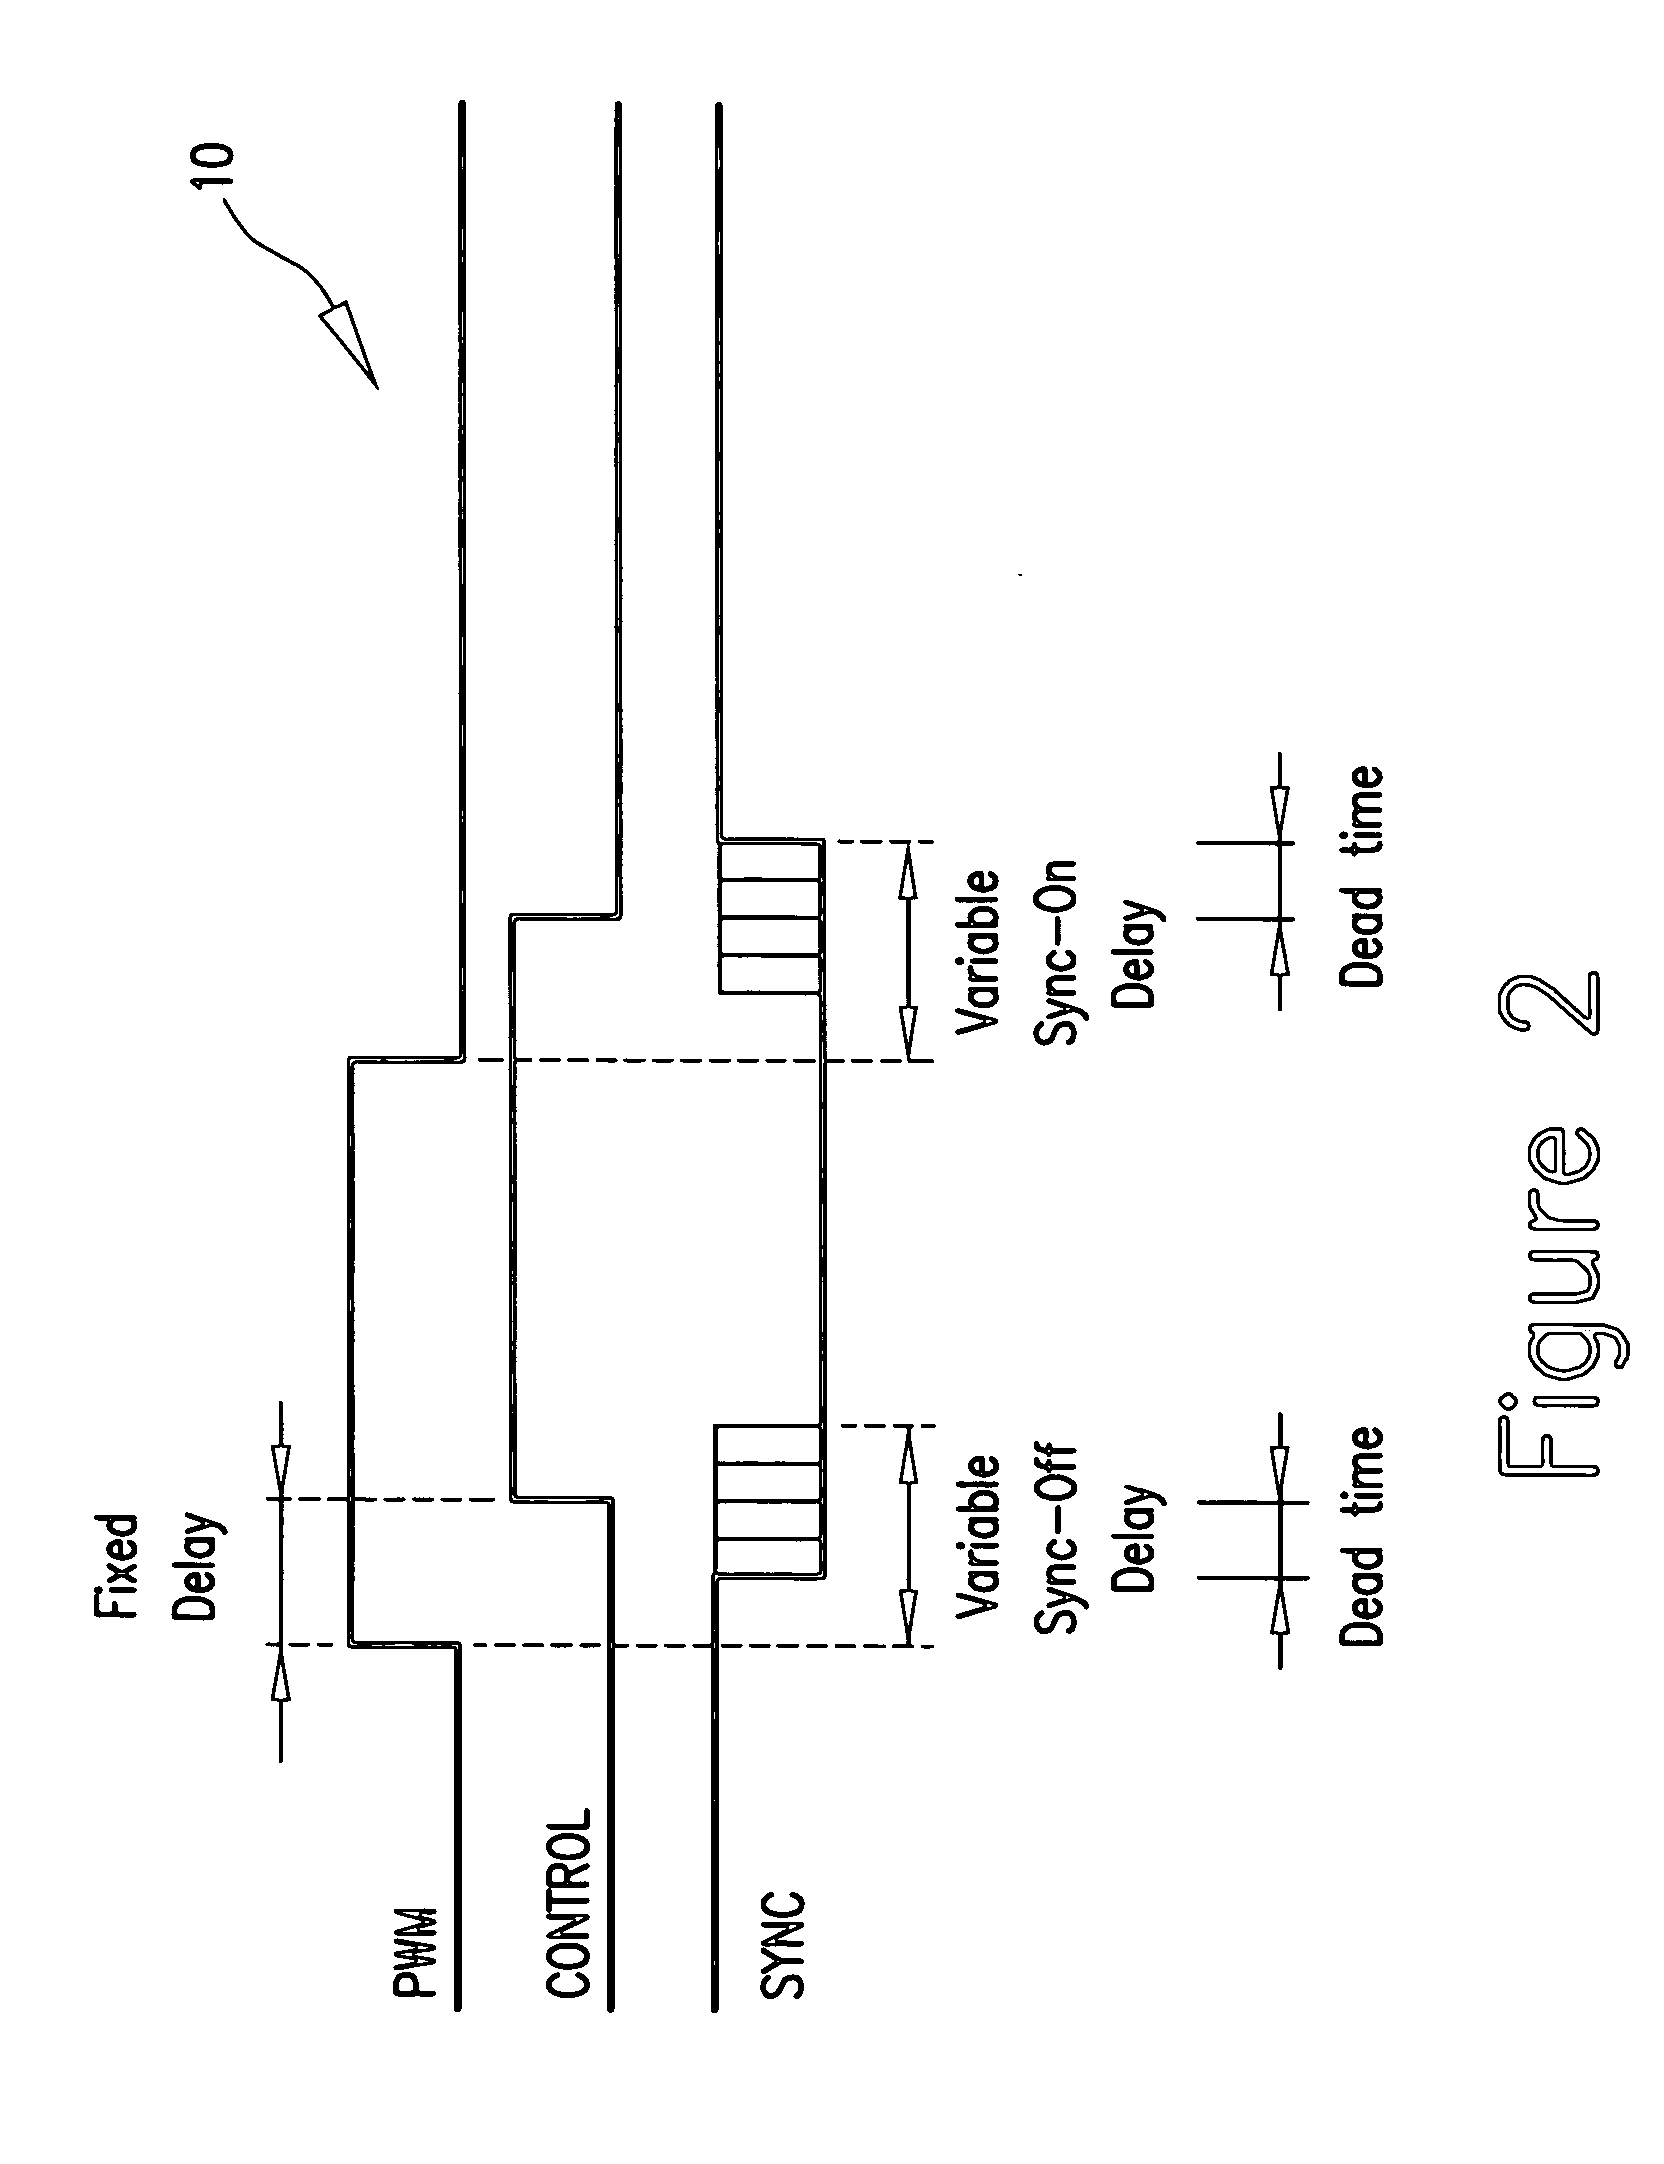 Apparatus and method for minimizing power loss associated with dead time